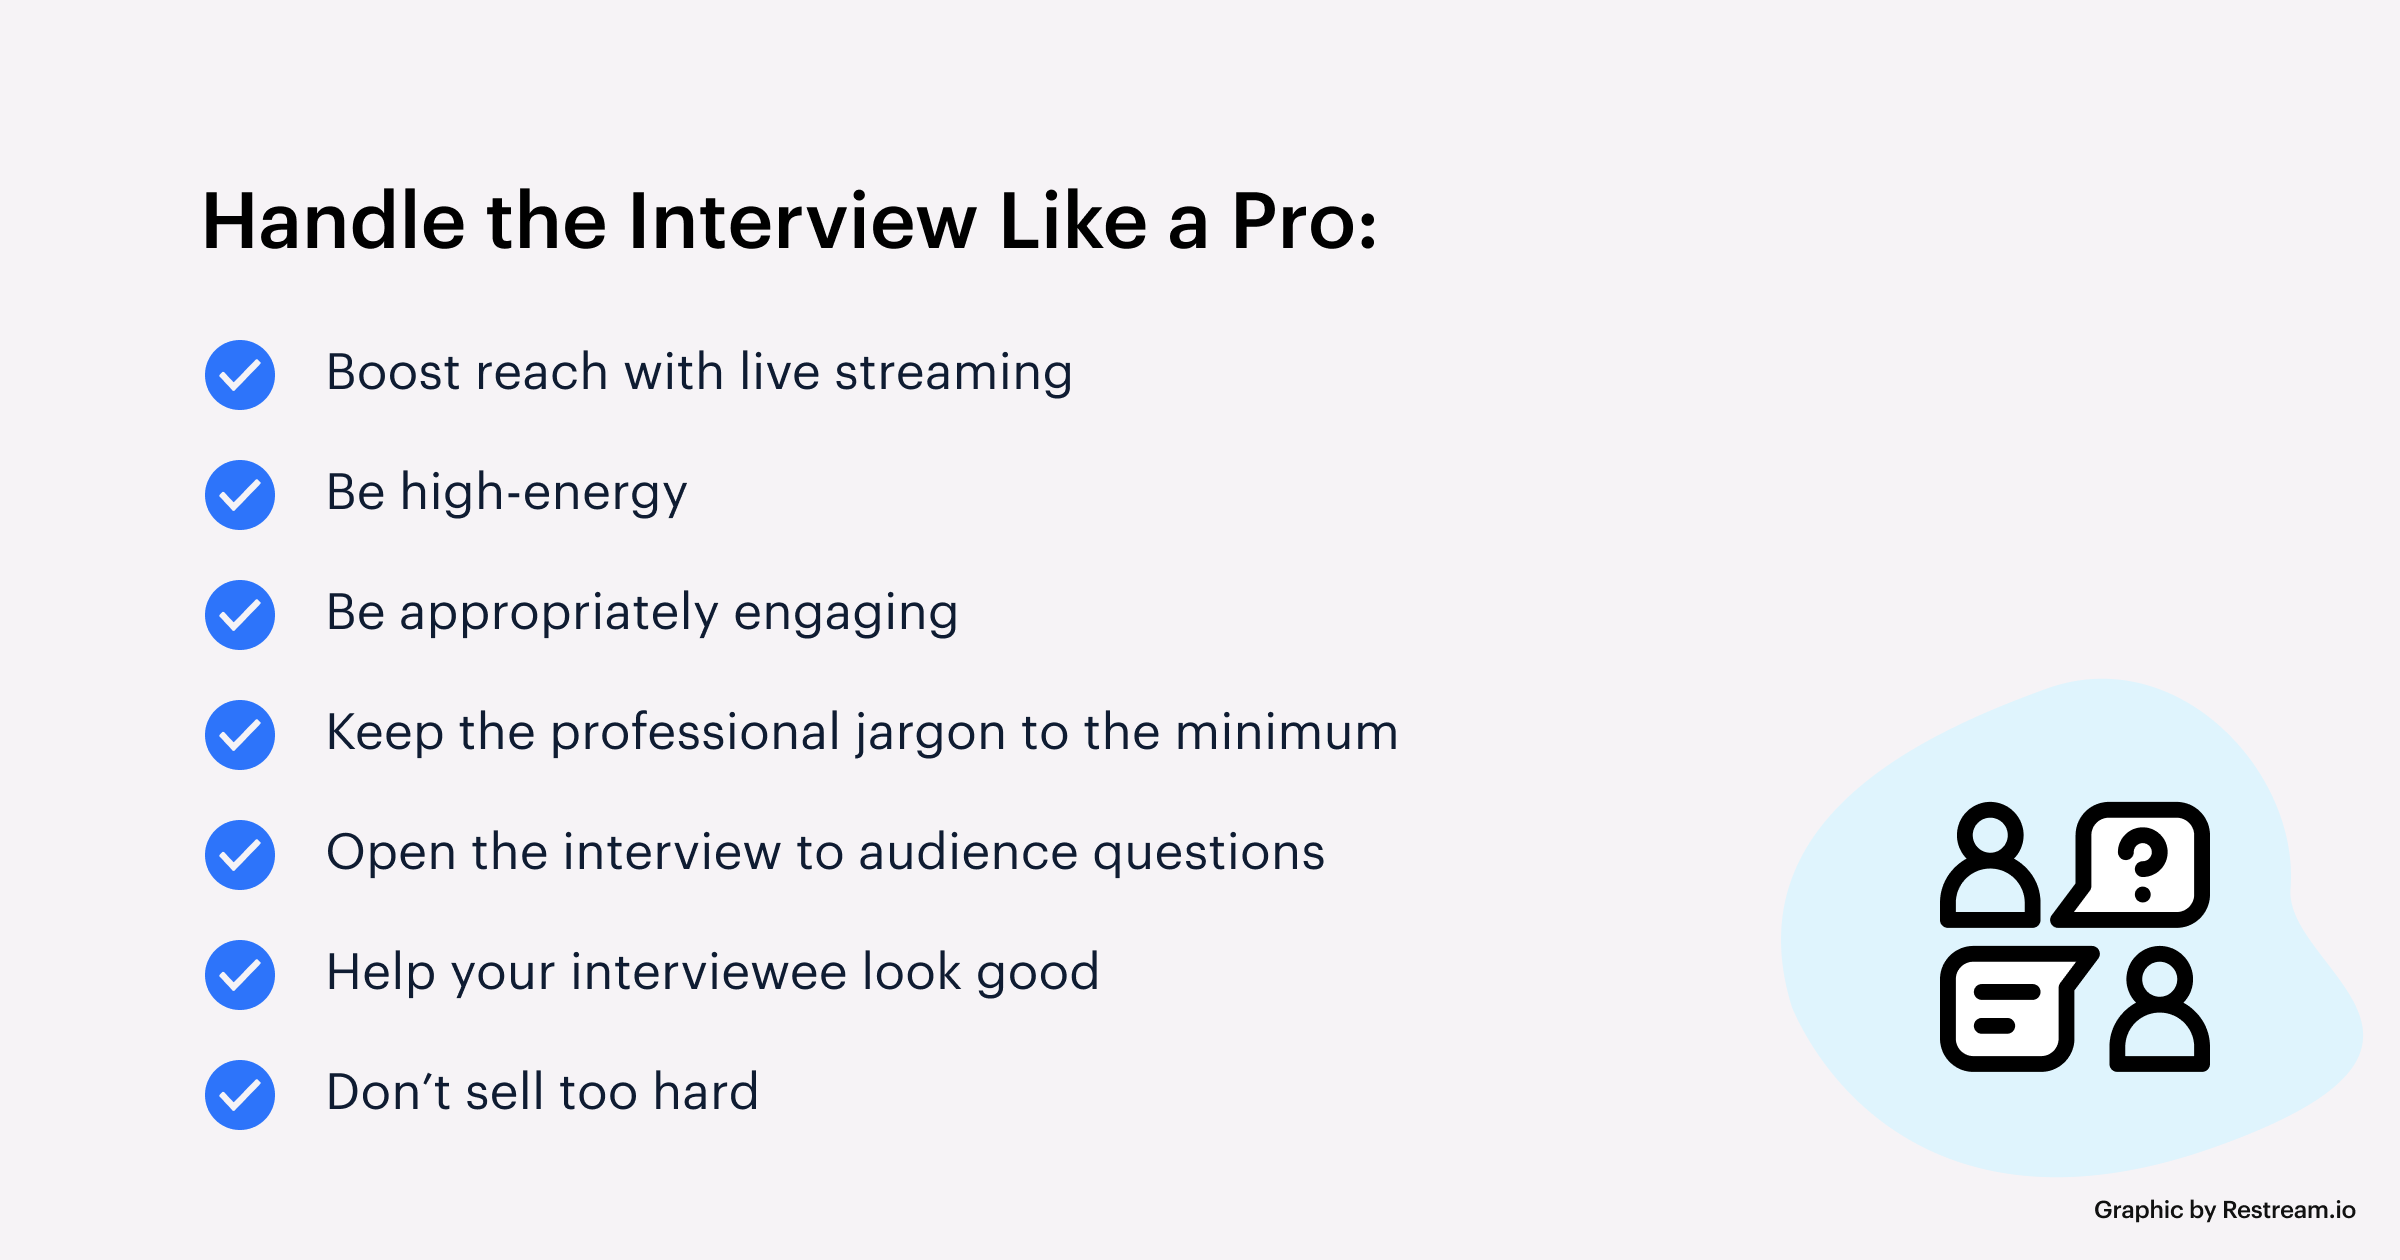 Handle the Interview Like a Pro checklist